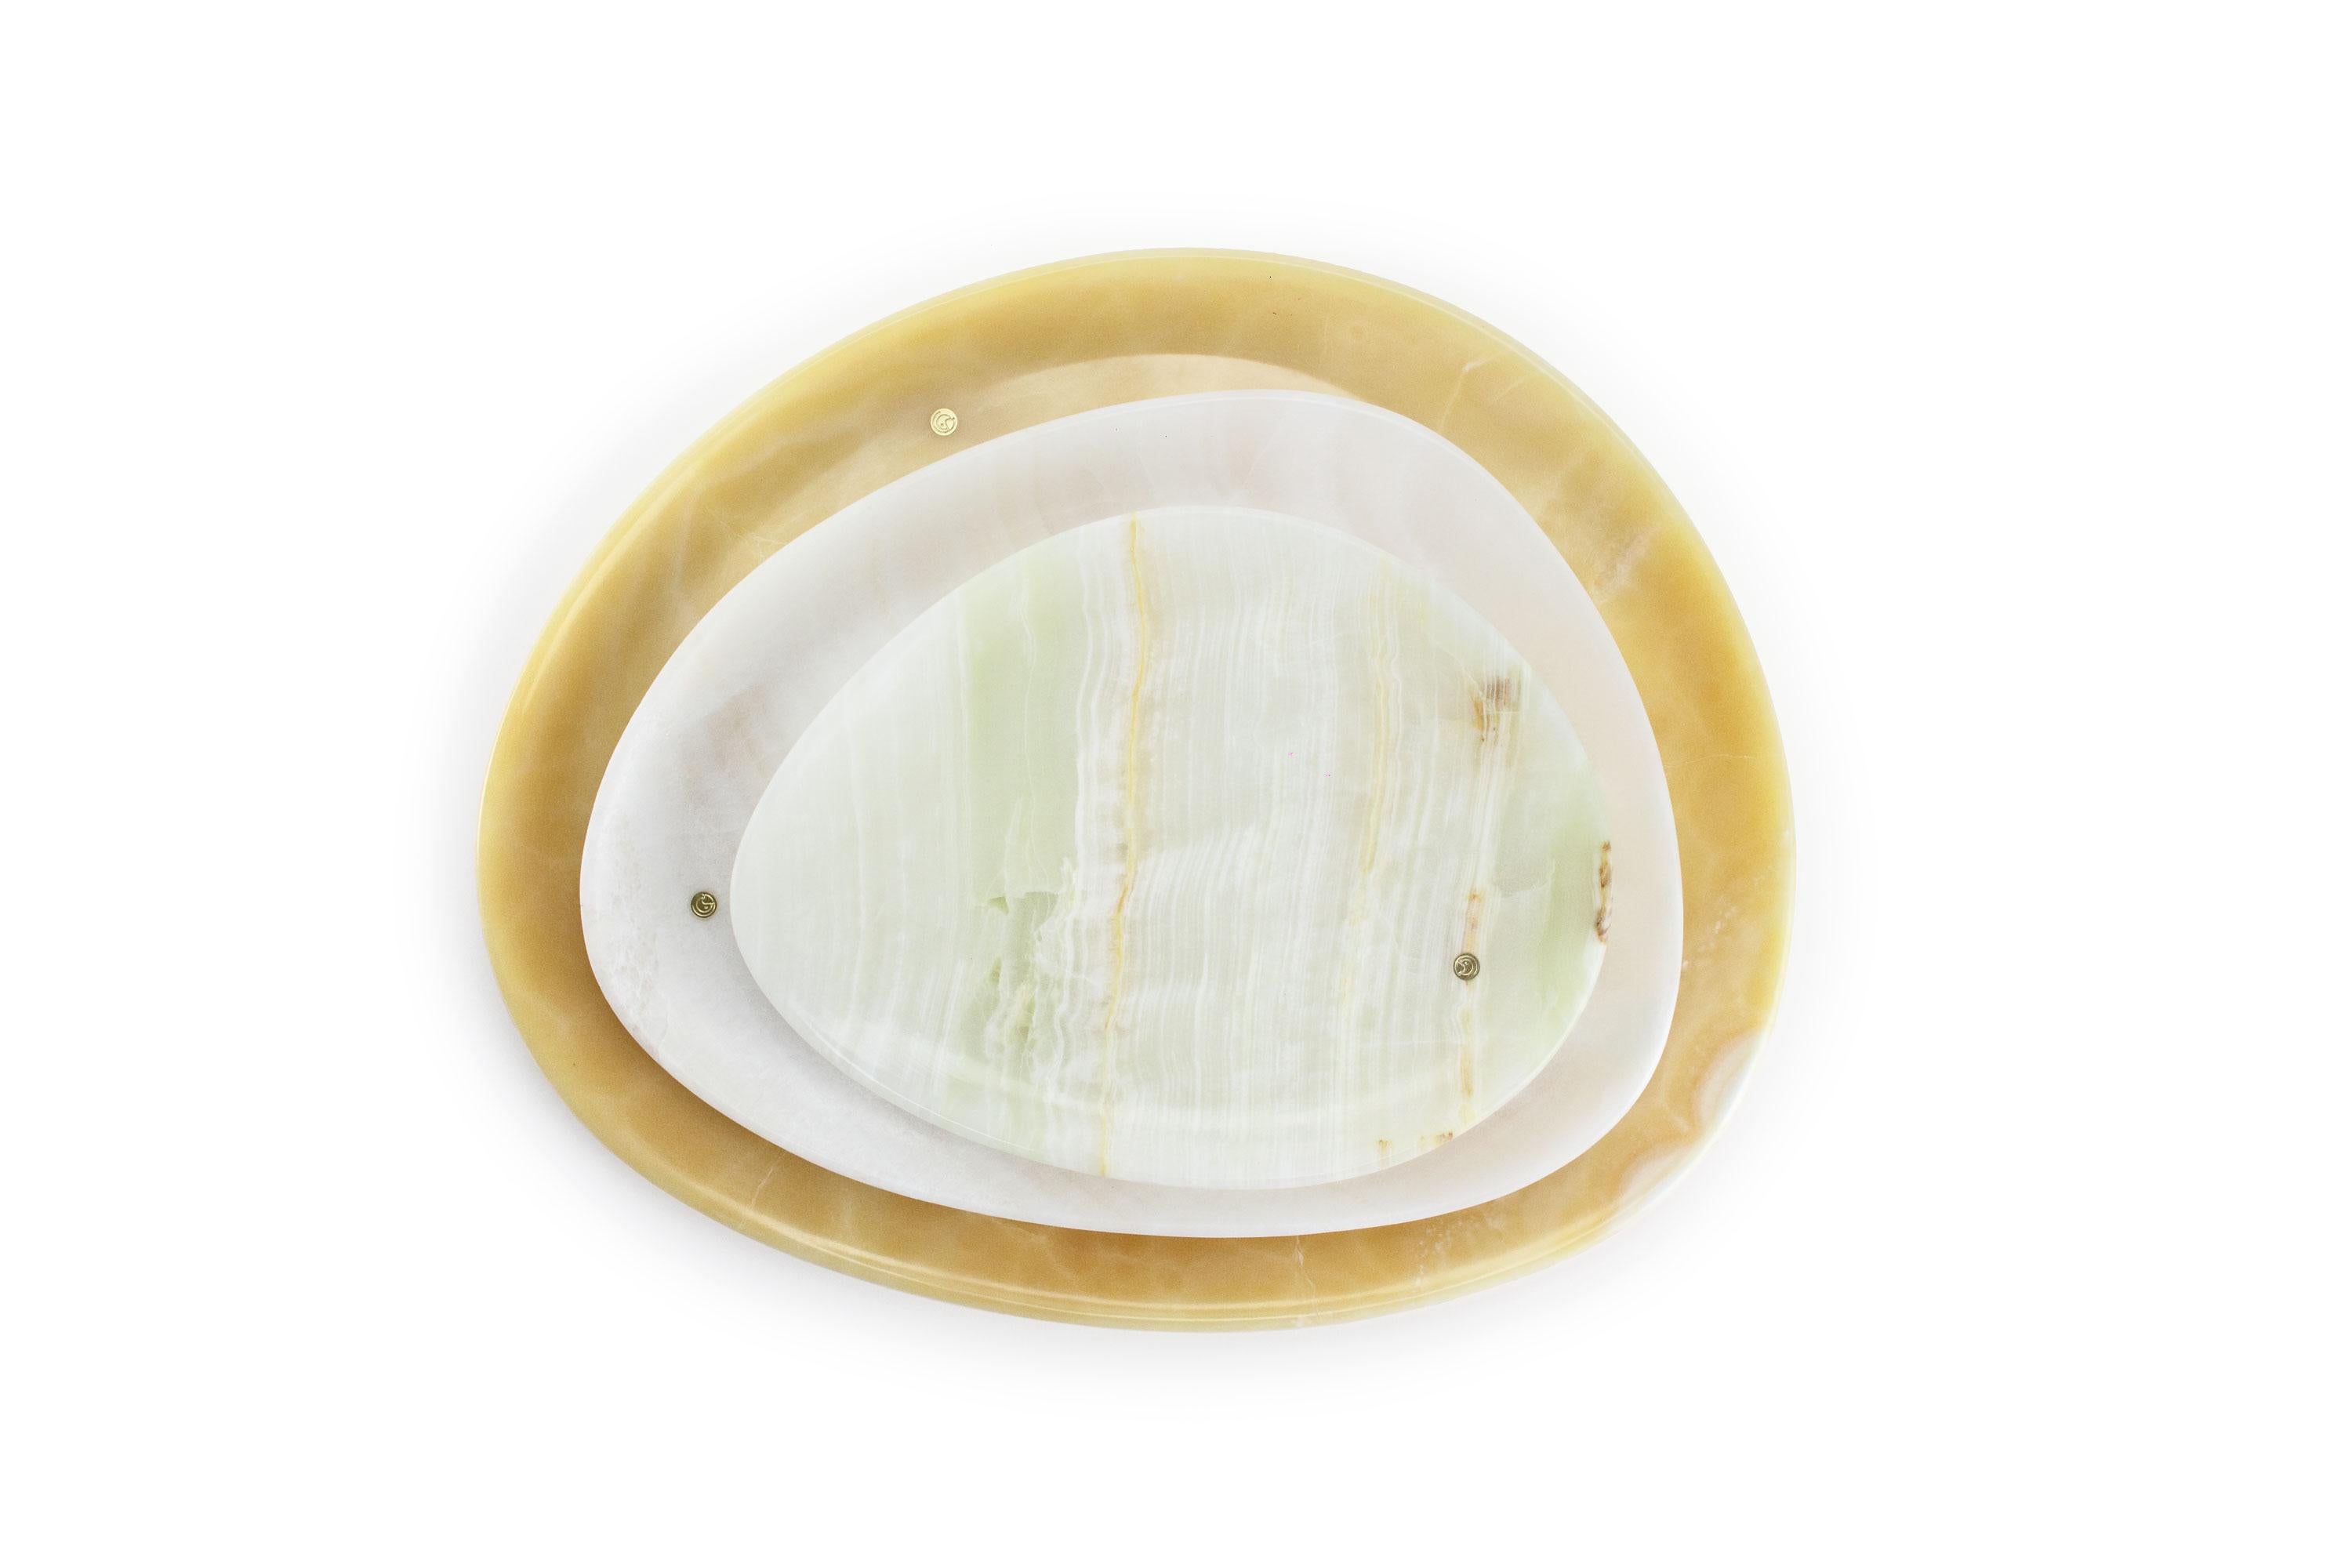 Hand carved presentation plates in green, white and orange onyx . Multiple use as plates, platters and placers. 

Dimensions: Small - L 24 W 20 H 1.8 cm, Medium - L 30 W 28 H 1.8 cm, Big - L 36 W 35 H 1.8 cm.
Available in different marbles, onyx and